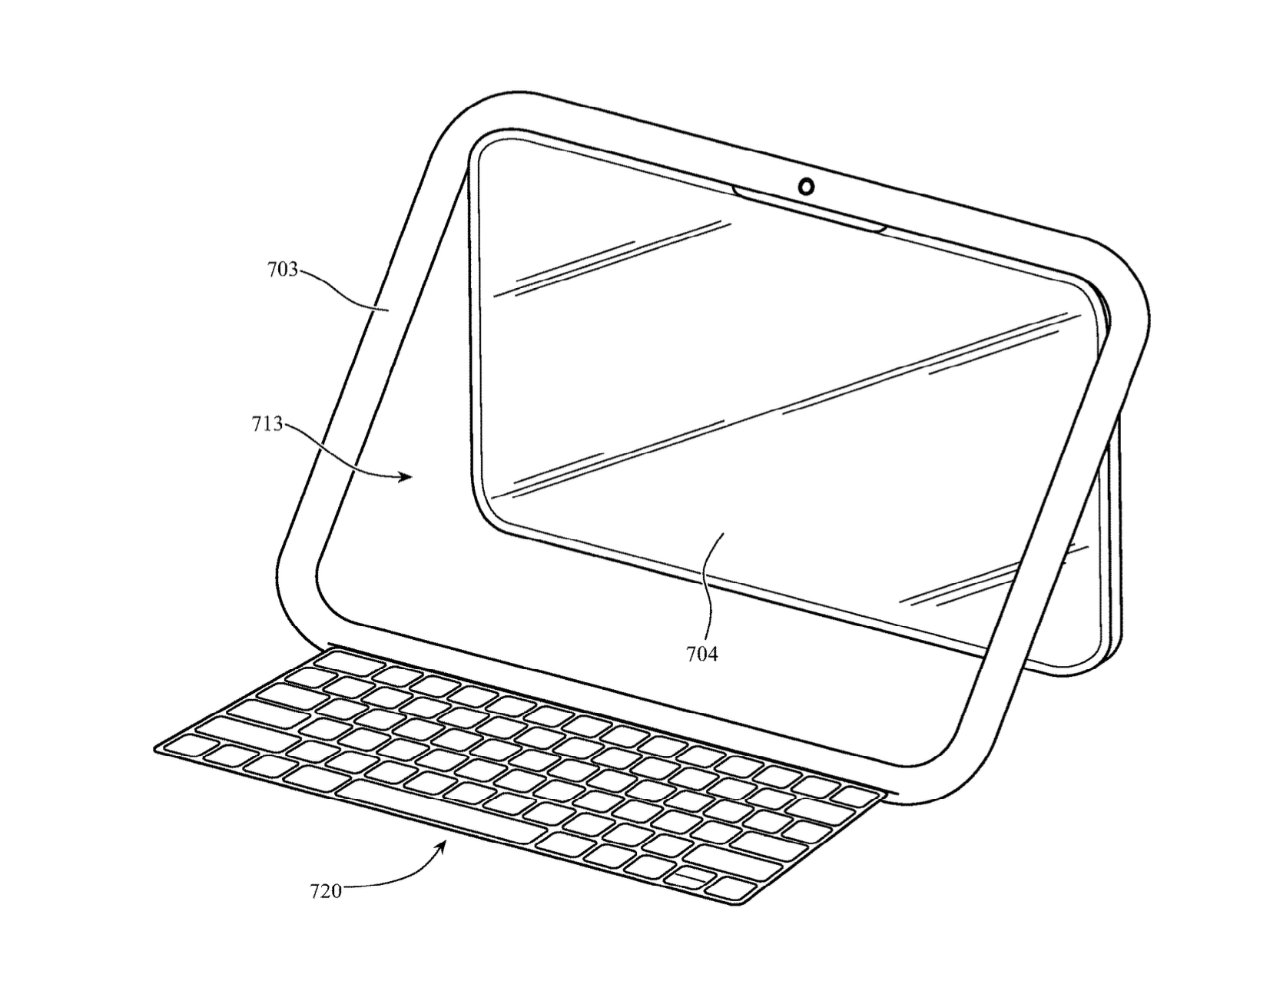 The screen itself could act as a kickstand, with the external keyboard pressed up against the case frame